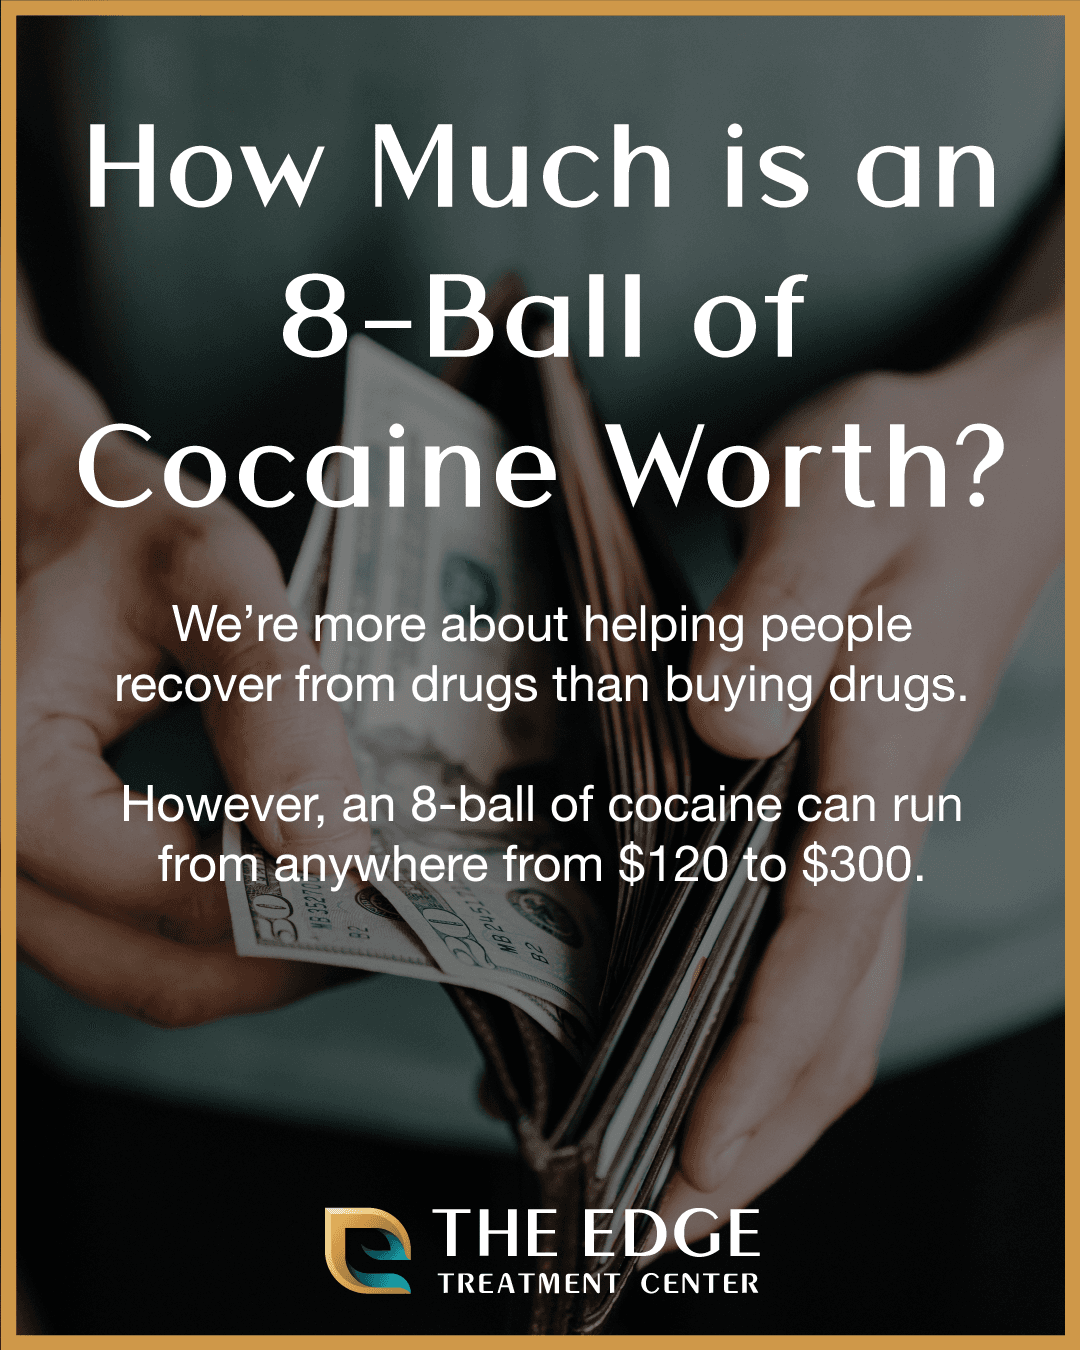 How Much is an 8-Ball of Cocaine Worth?